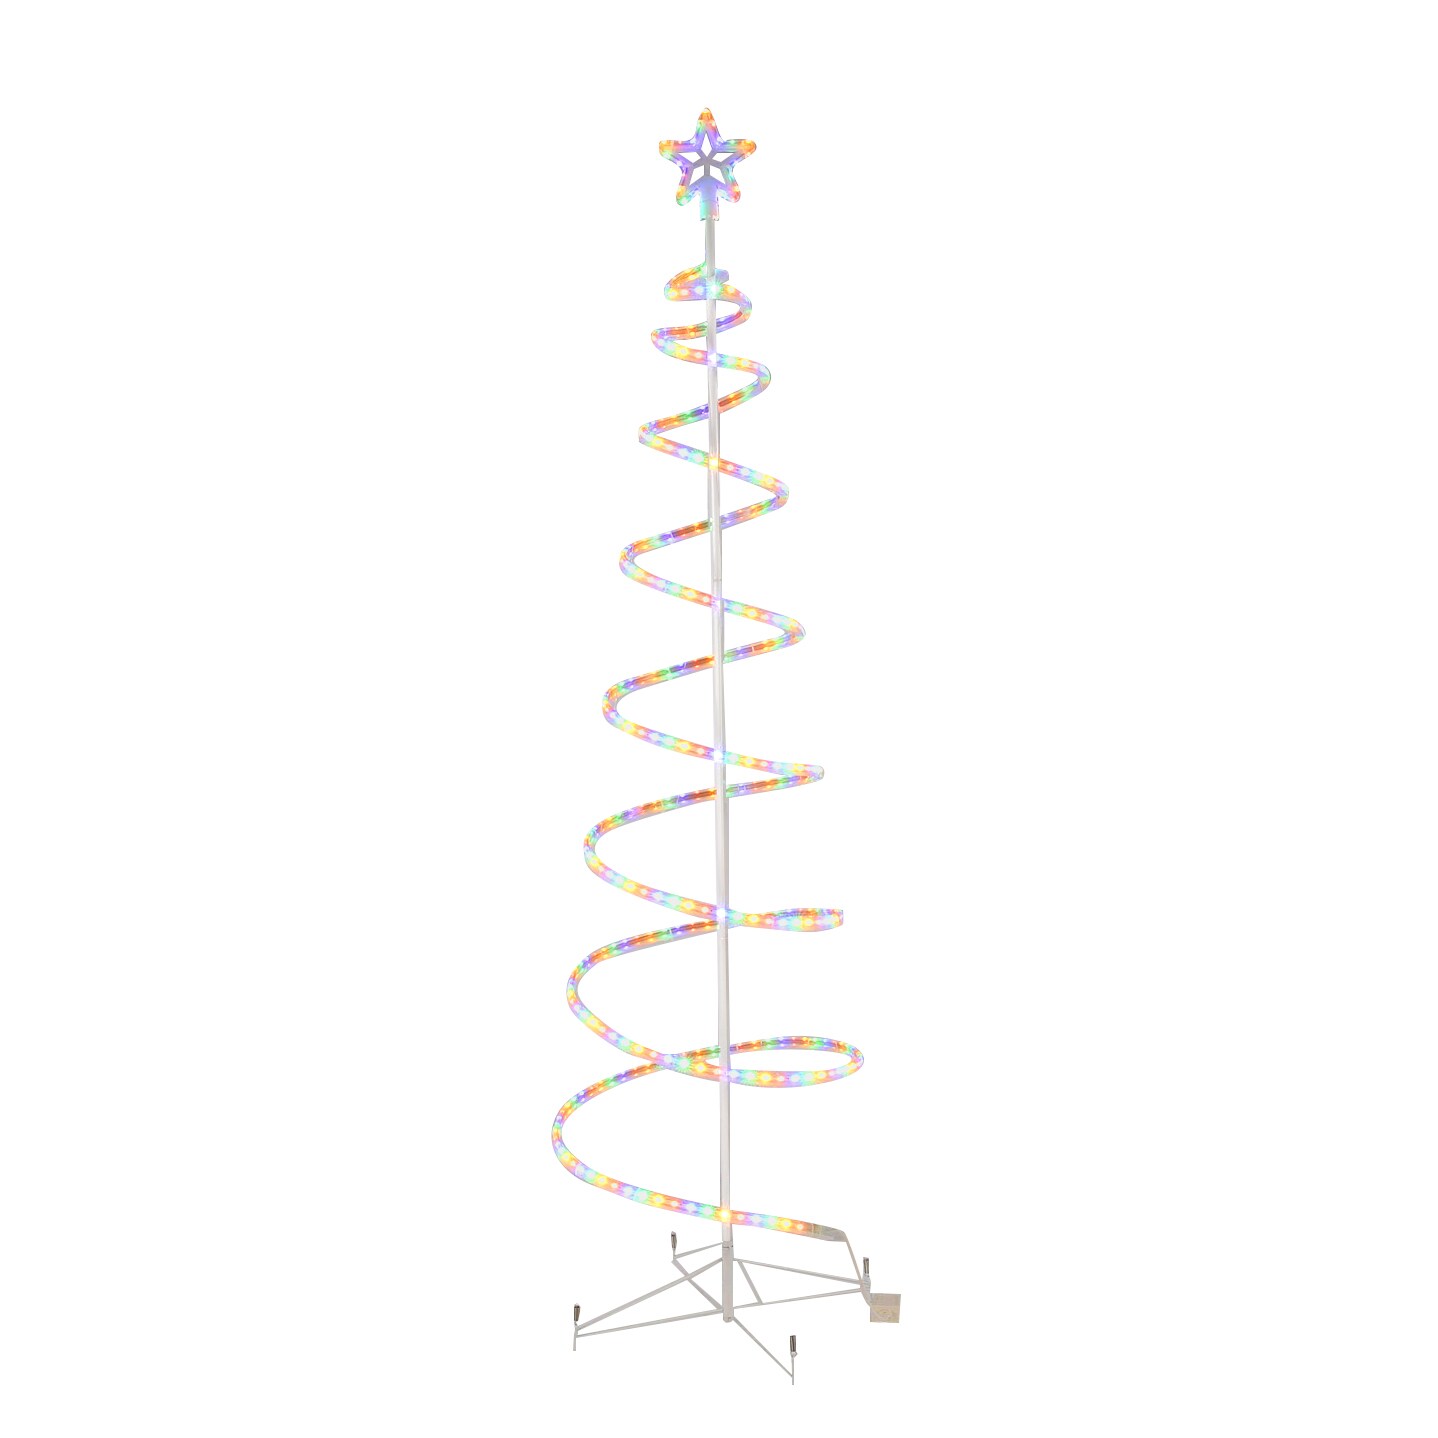 GE 84-in Spiral Tree Tree with Color Changing LED Lights at Lowes.com